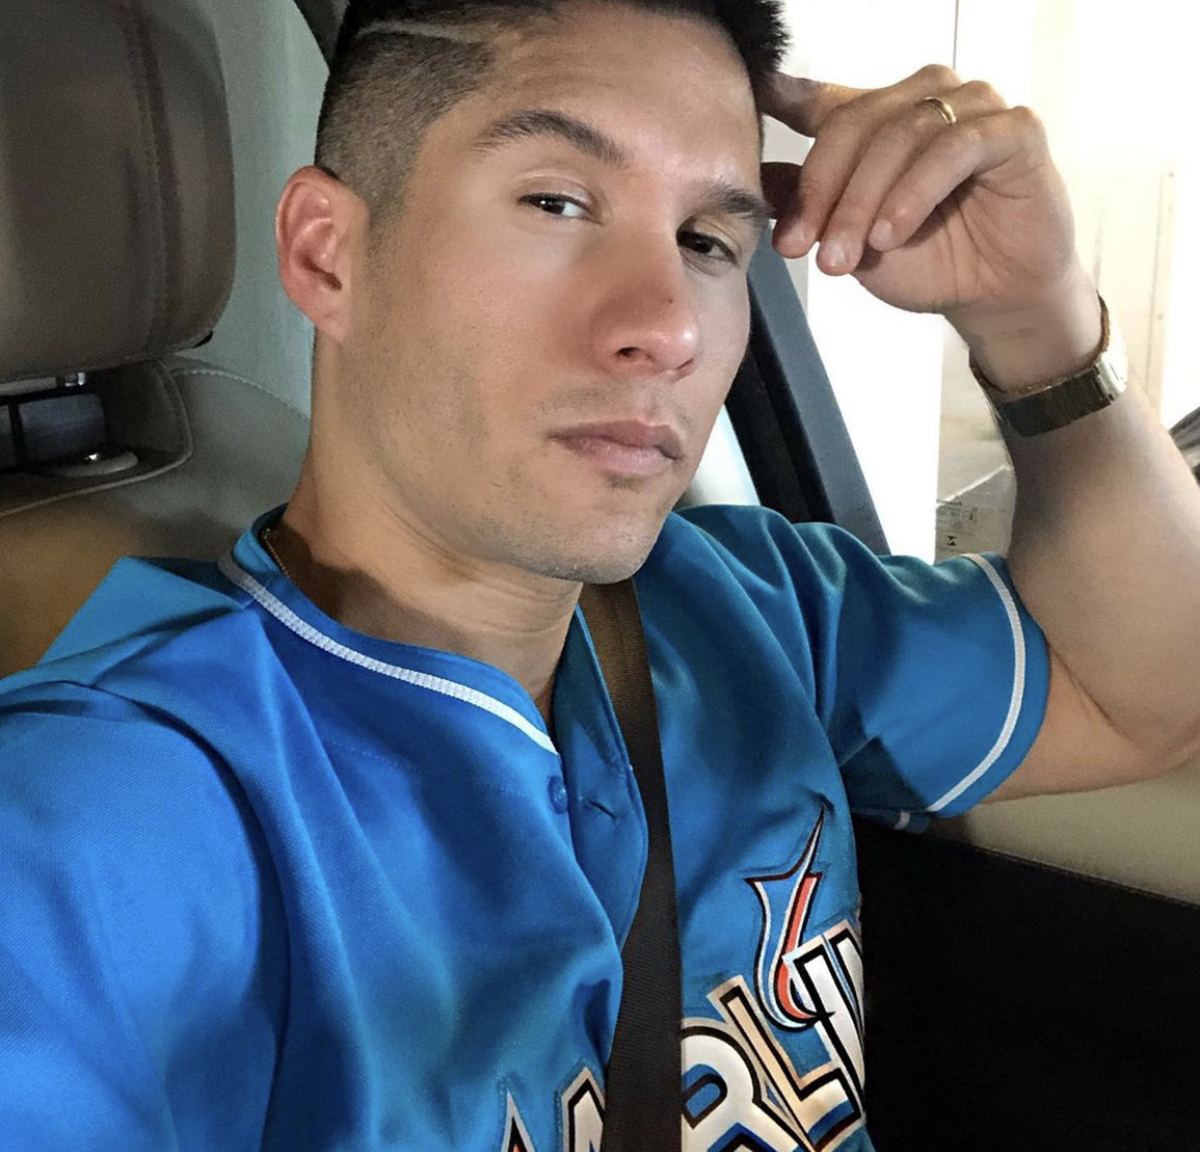 Chyno Miranda tells us exclusively what he was smoking